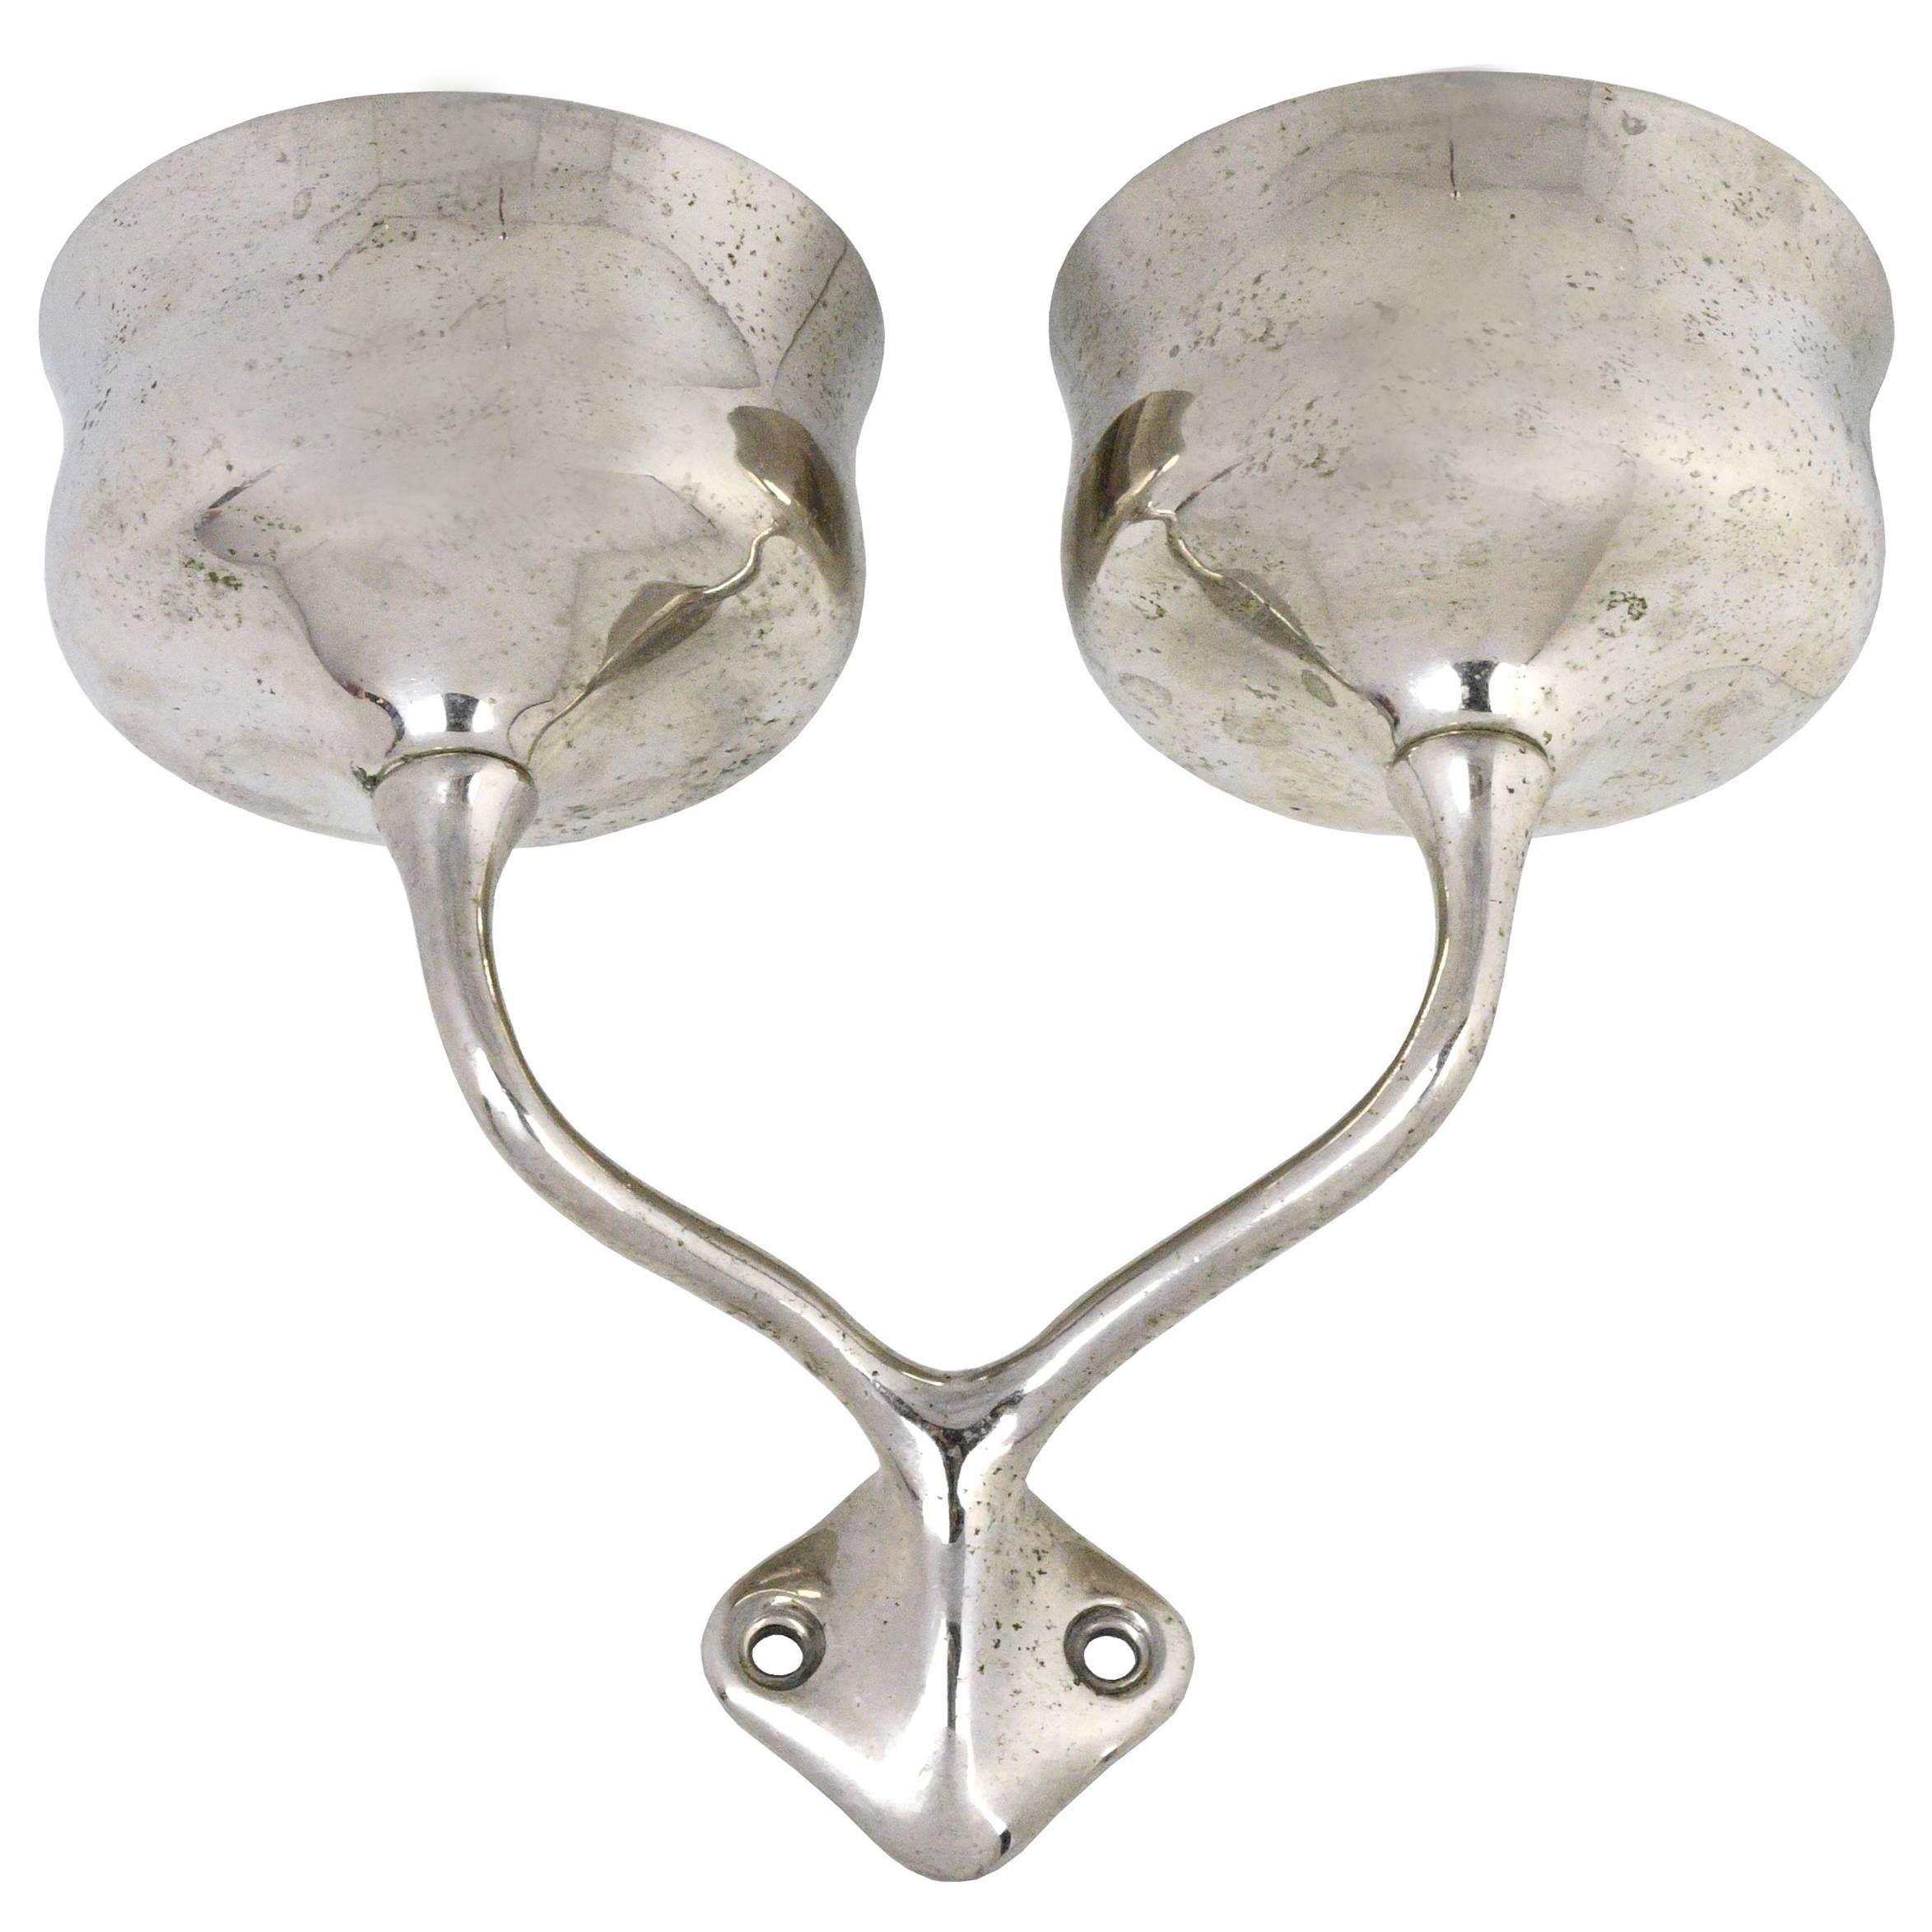 Nickel-Plated Double Bathroom Cup Holder